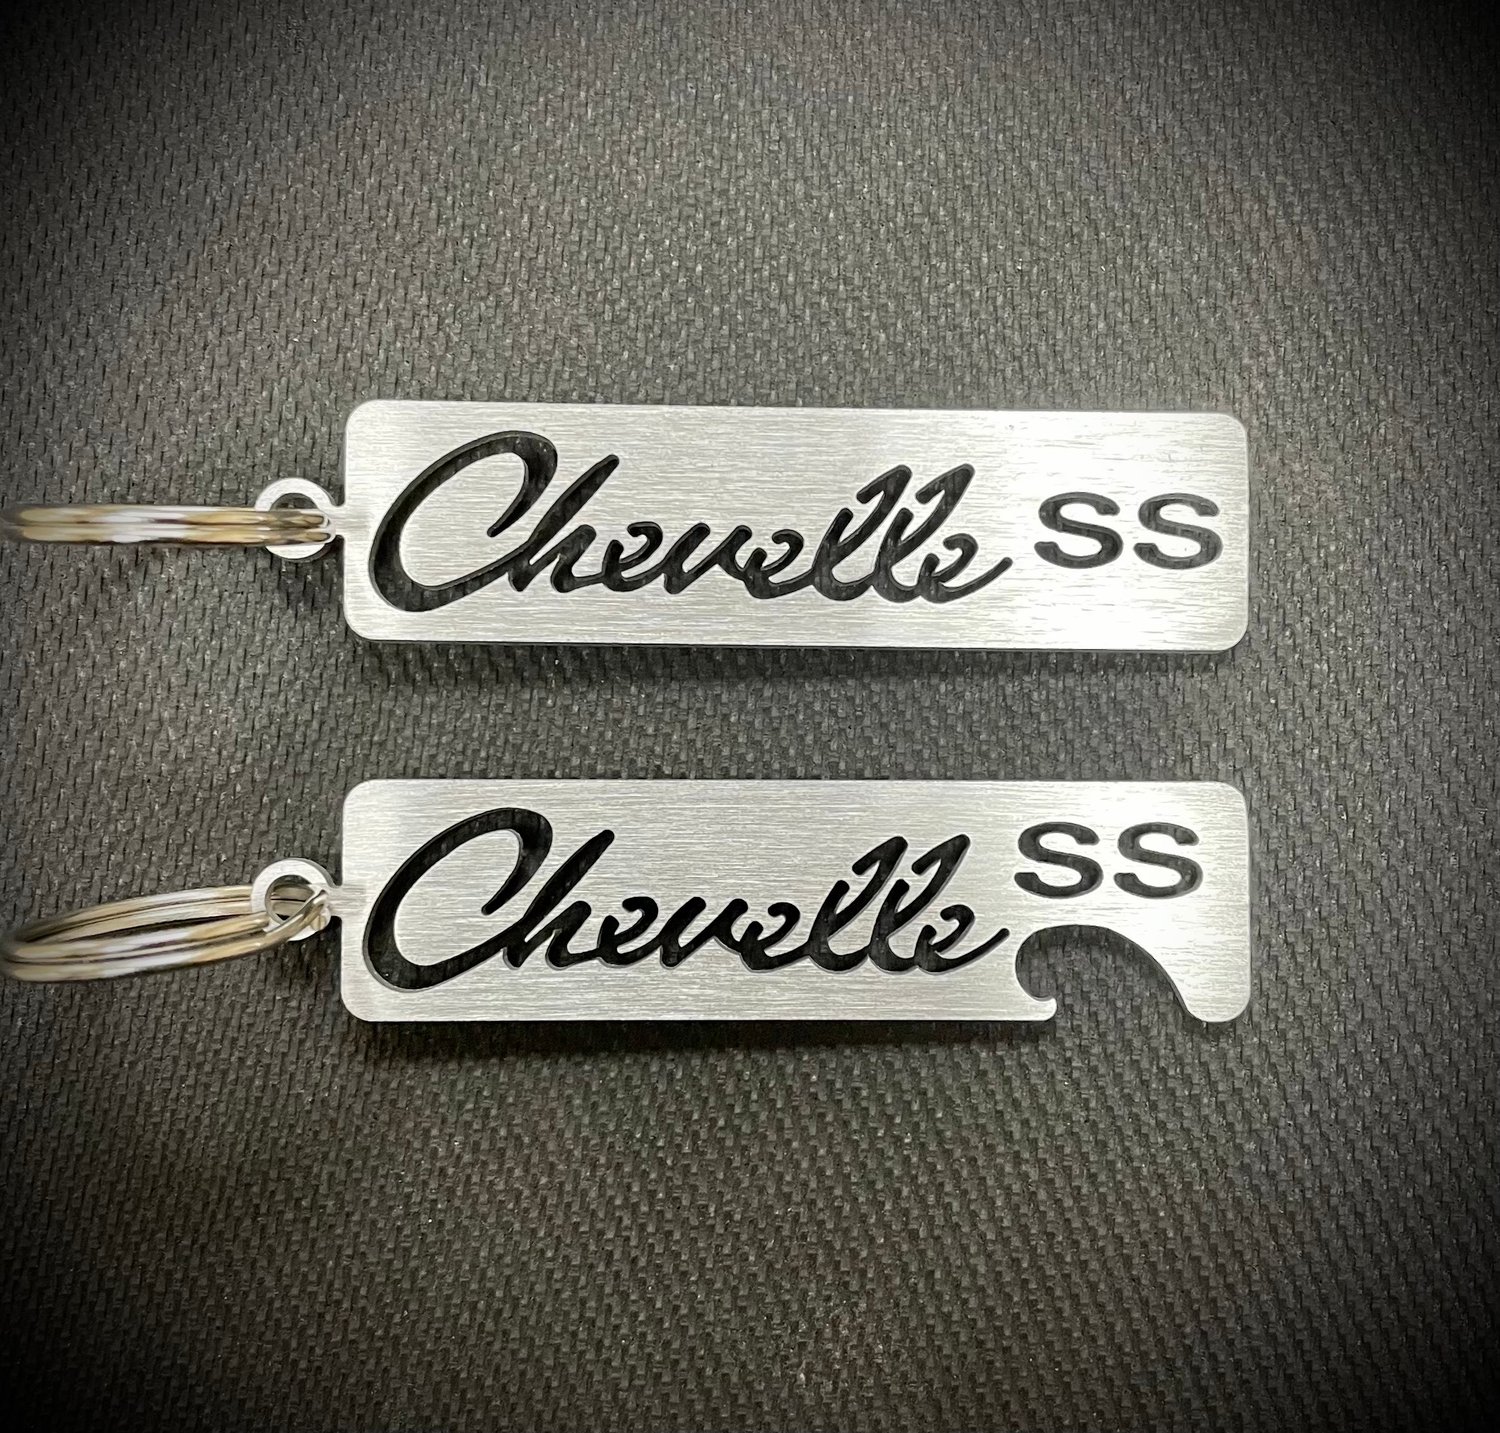 For Chevelle SS Enthusiasts 